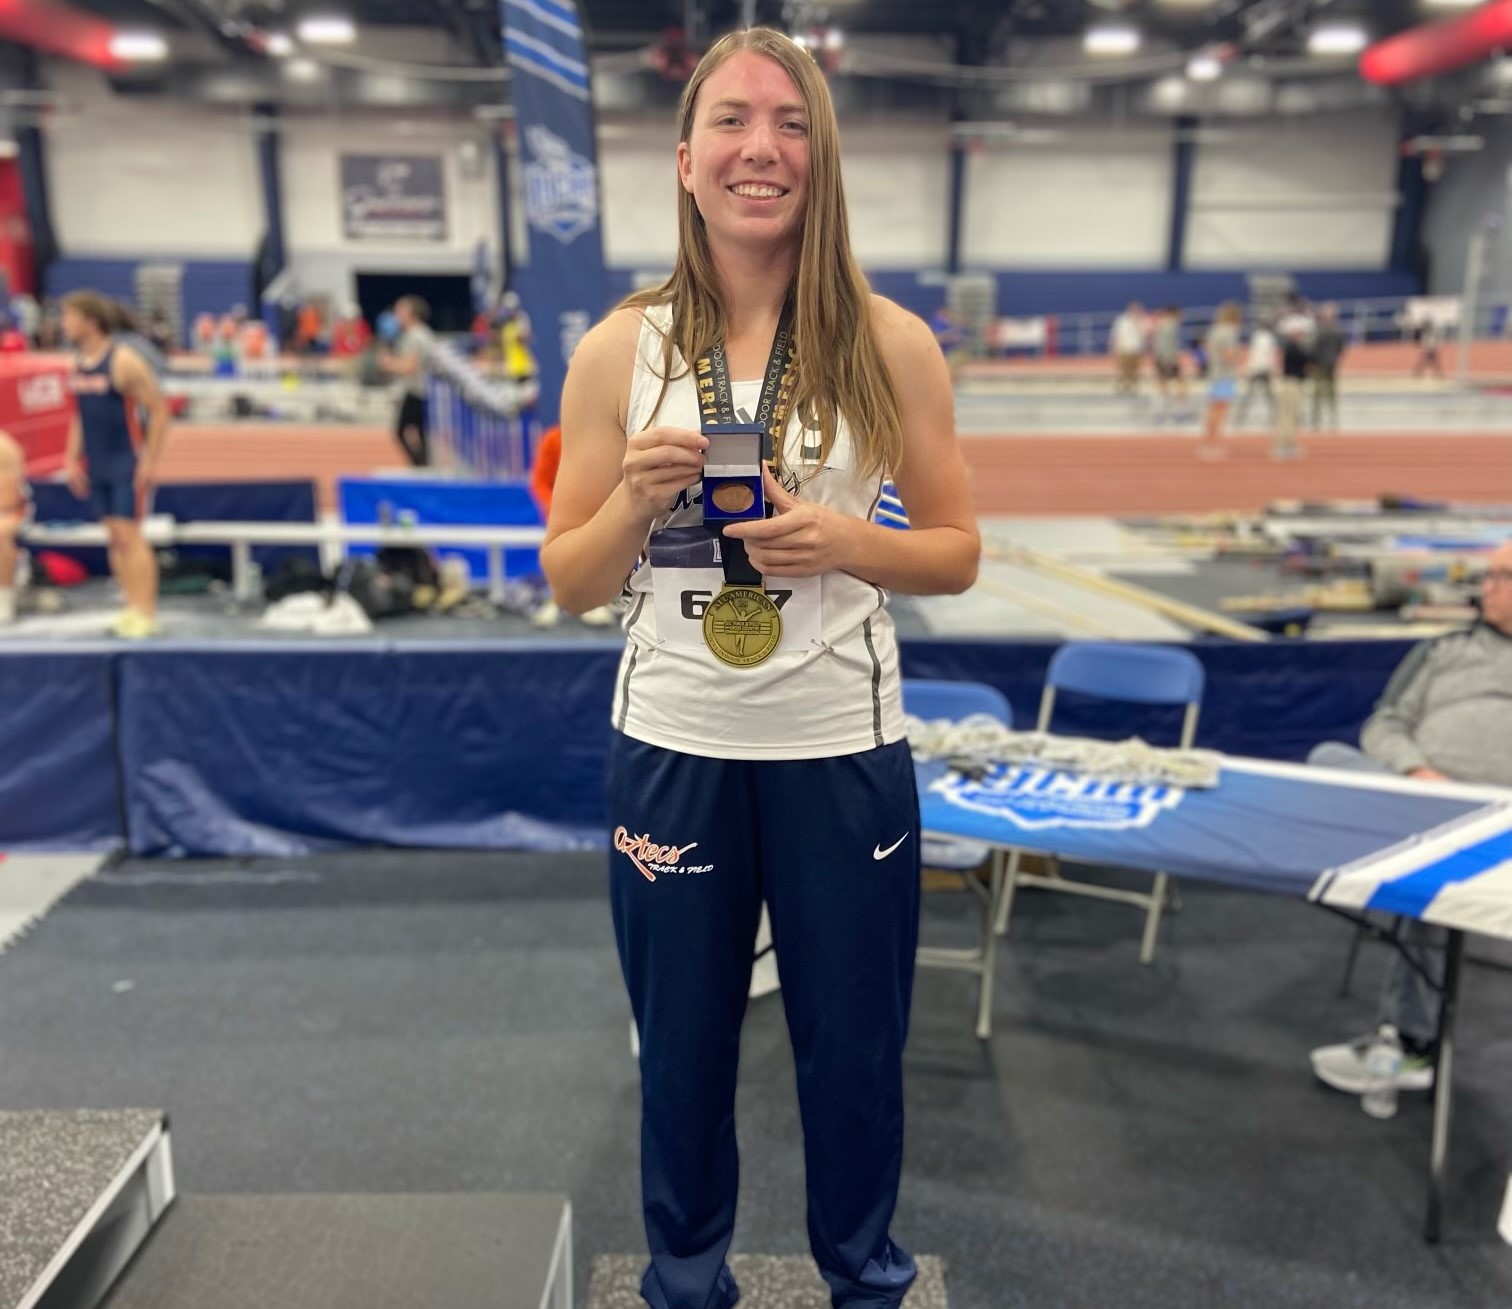 Freshman Maylee Thompson (Willcox HS) took fifth place and earned four team points in the Pentatlon with a score of 3002 points. It was a personal-best and also placed her fourth in the Pima Indoor all-time school records. The Aztecs are tied for 18th place in the team standings with four points. The Aztecs close out the competition on Saturday in Gainesville, FL. Photo courtesy of Chad Harrison